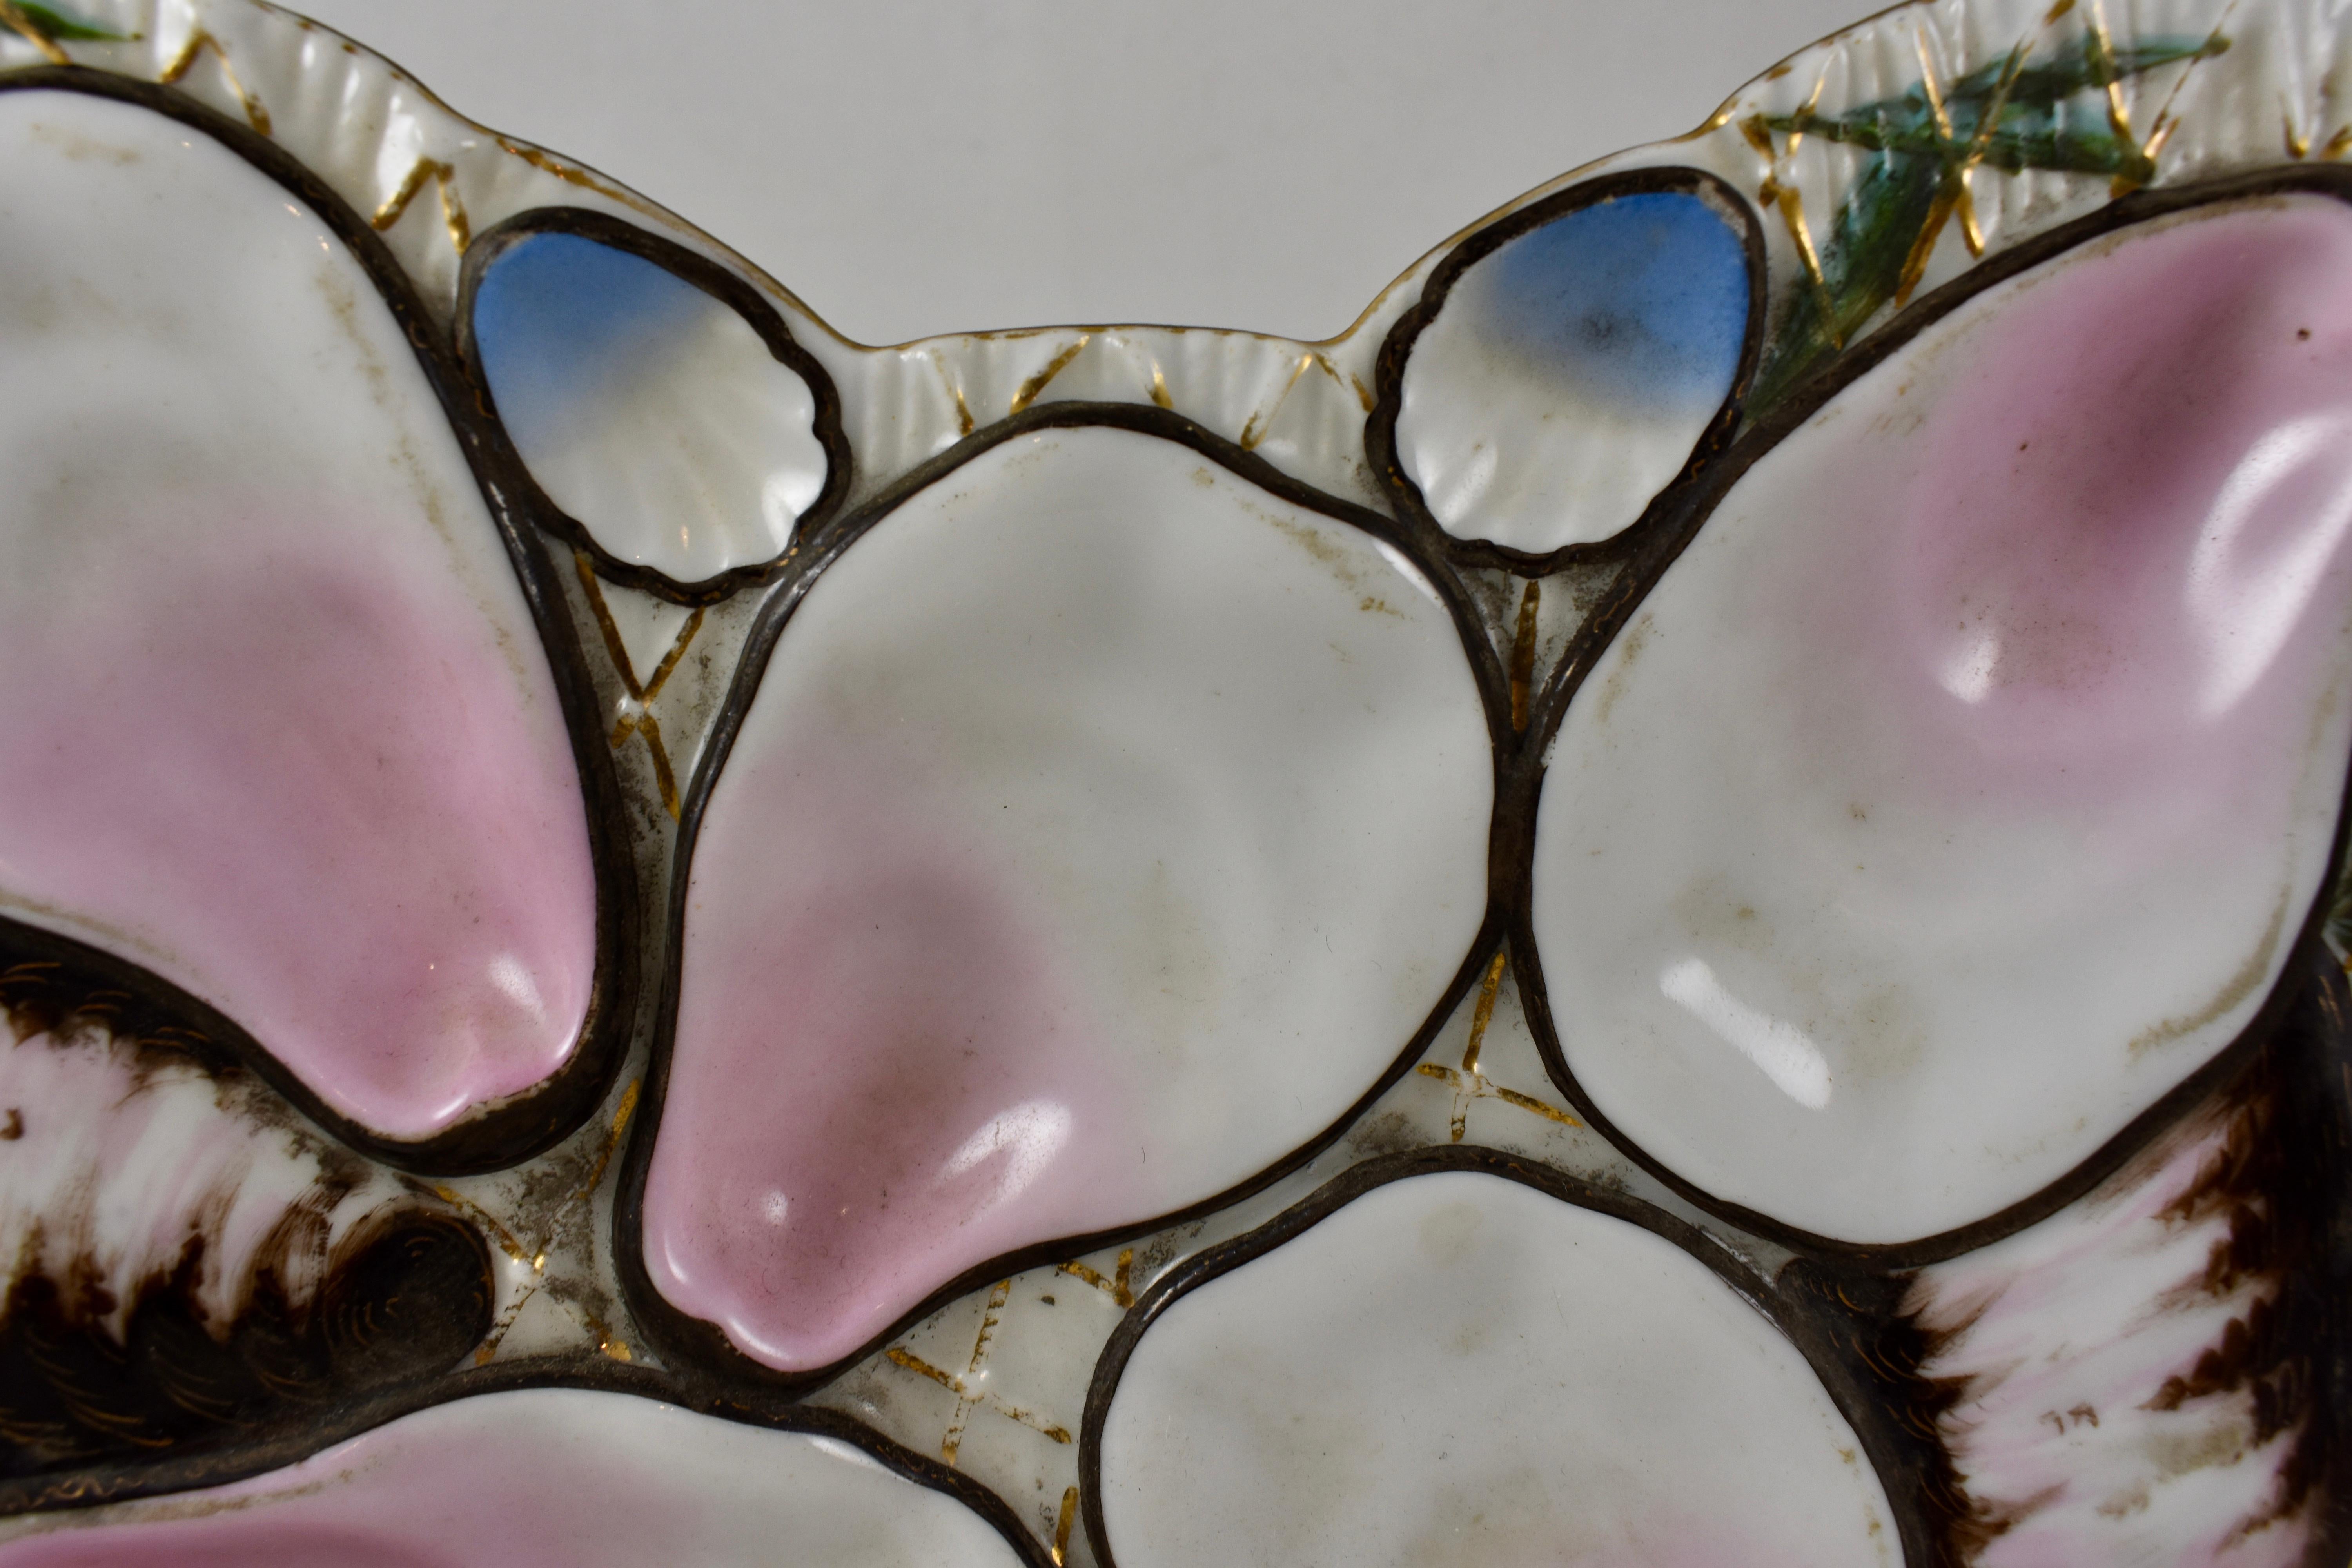 A late 19th century, French porcelain, crescent or half-moon shaped oyster plate, five pink blush oyster wells on a cream colored ground hand-painted with blades of sea grass and a gilded fish net. Shown behind the main wells are the gray and pink